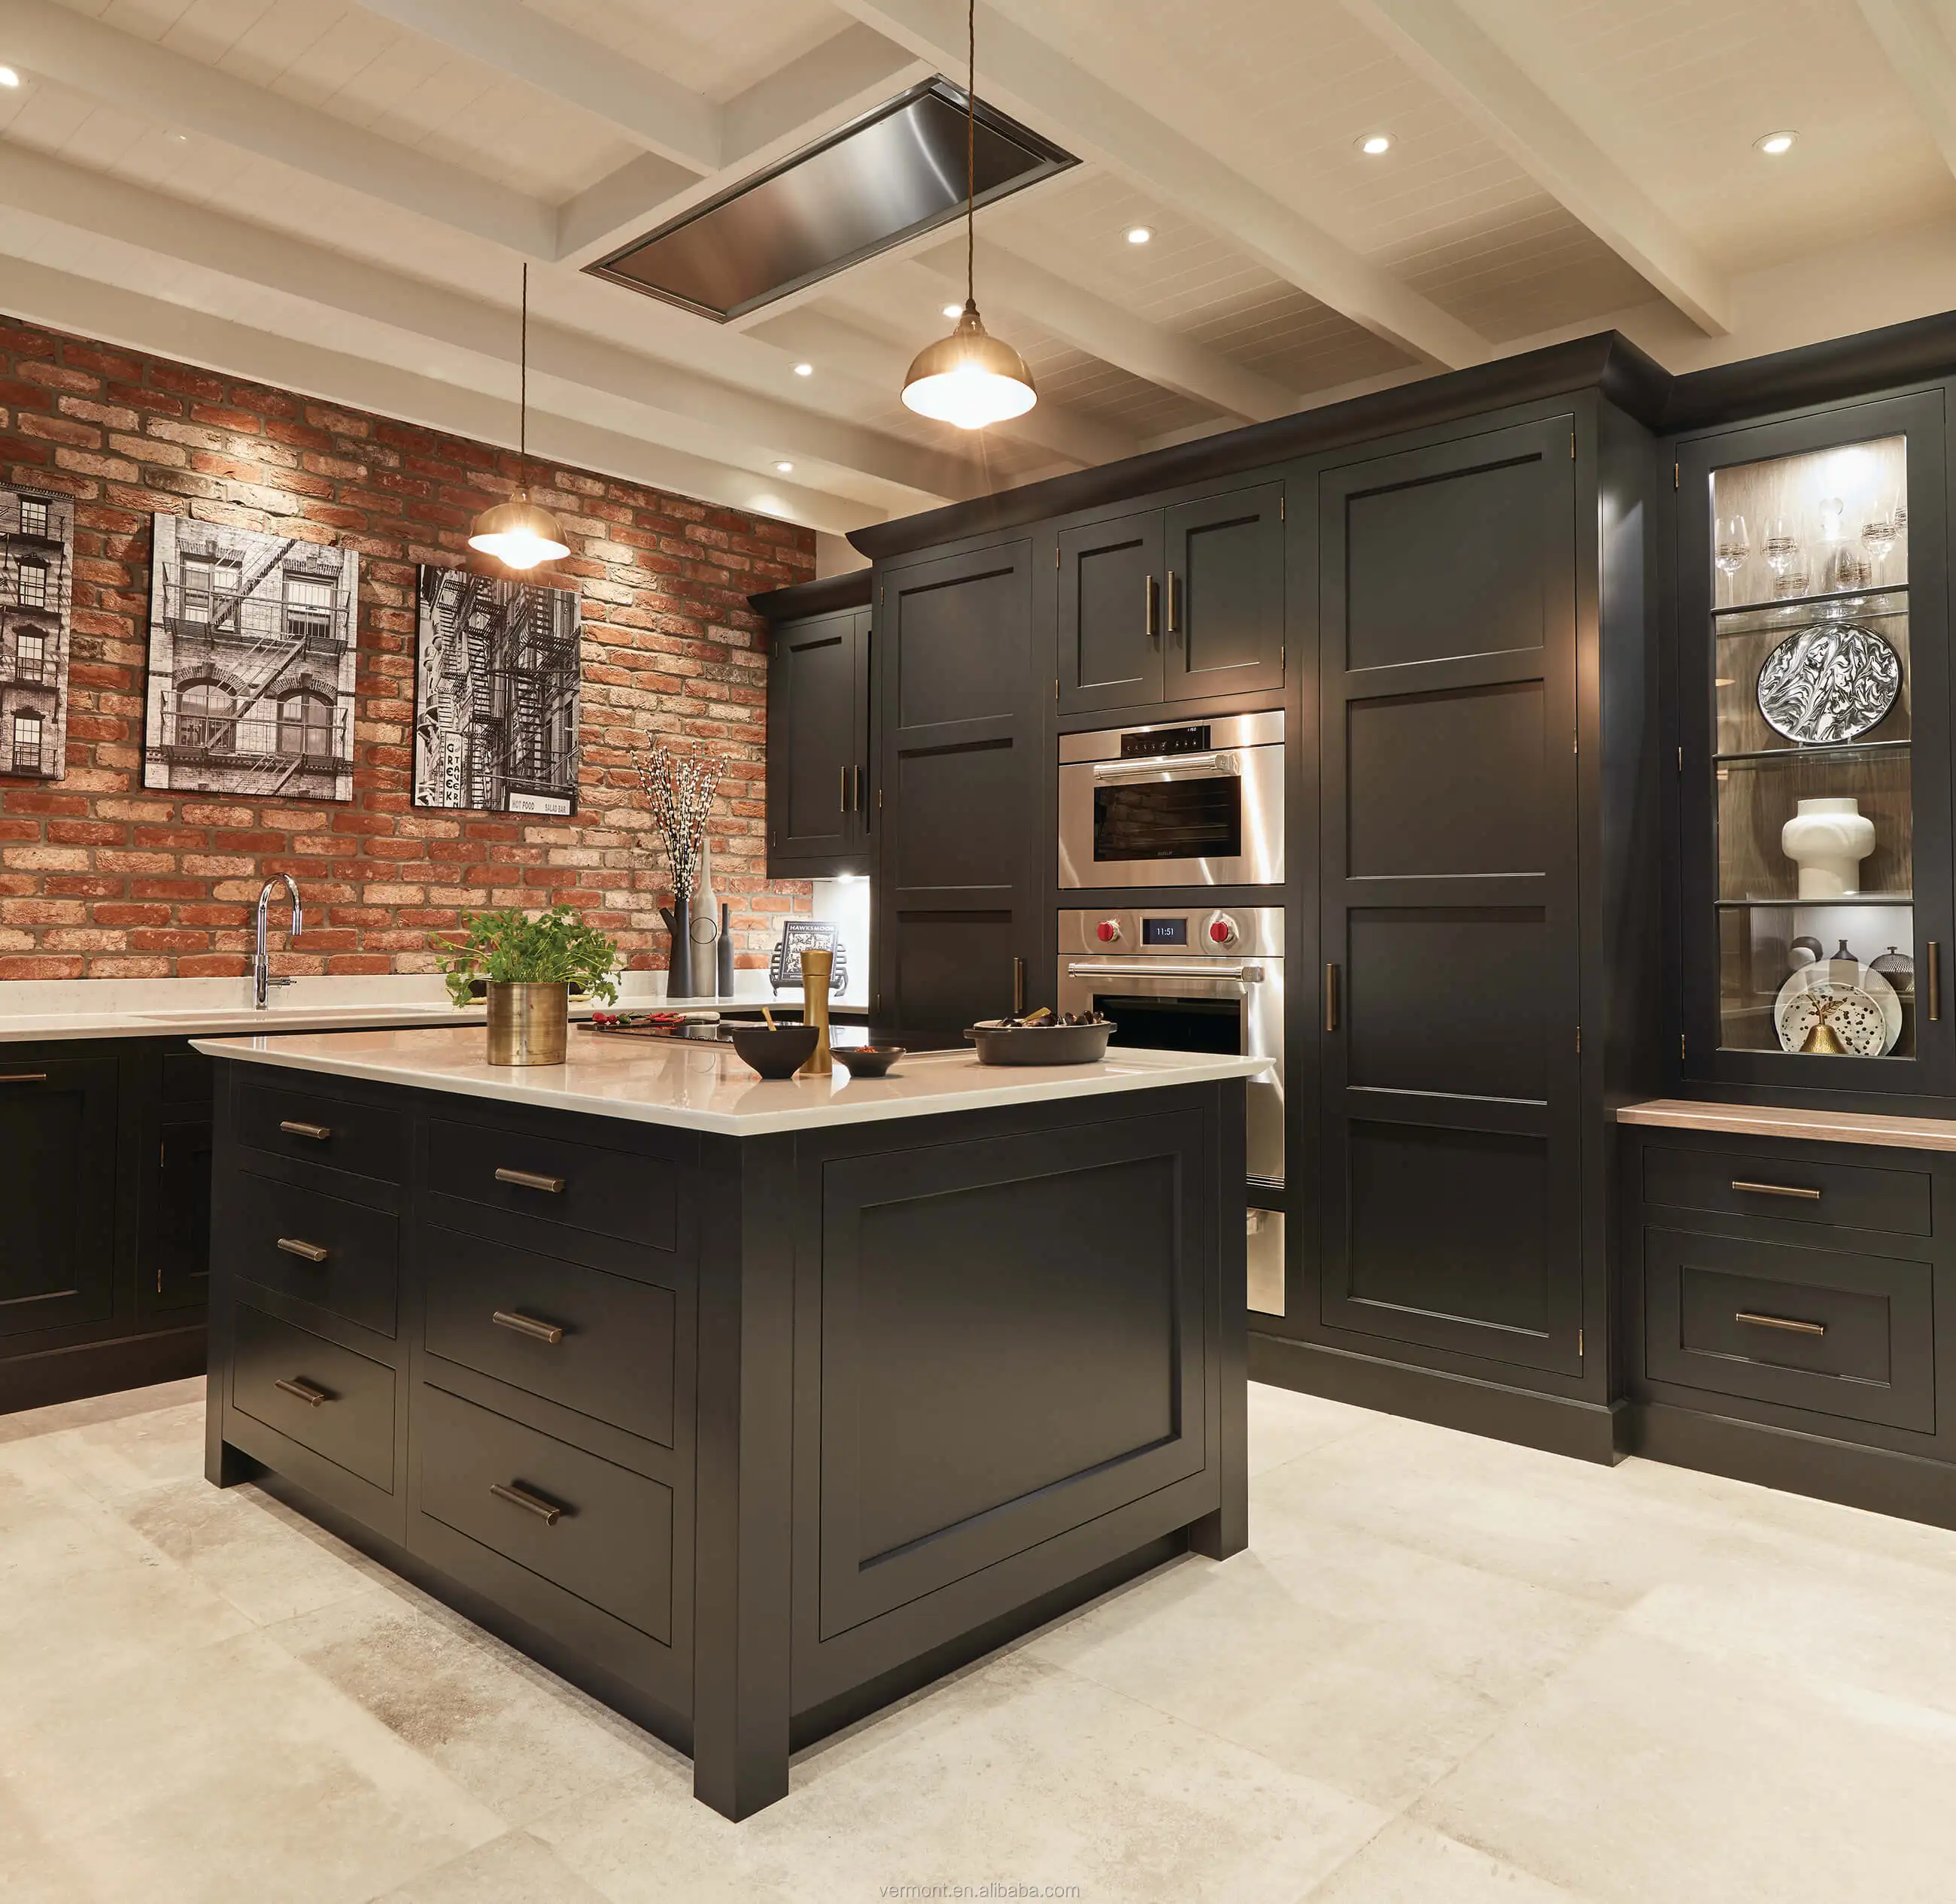 Creatice Black Cabinets In Kitchen for Small Space